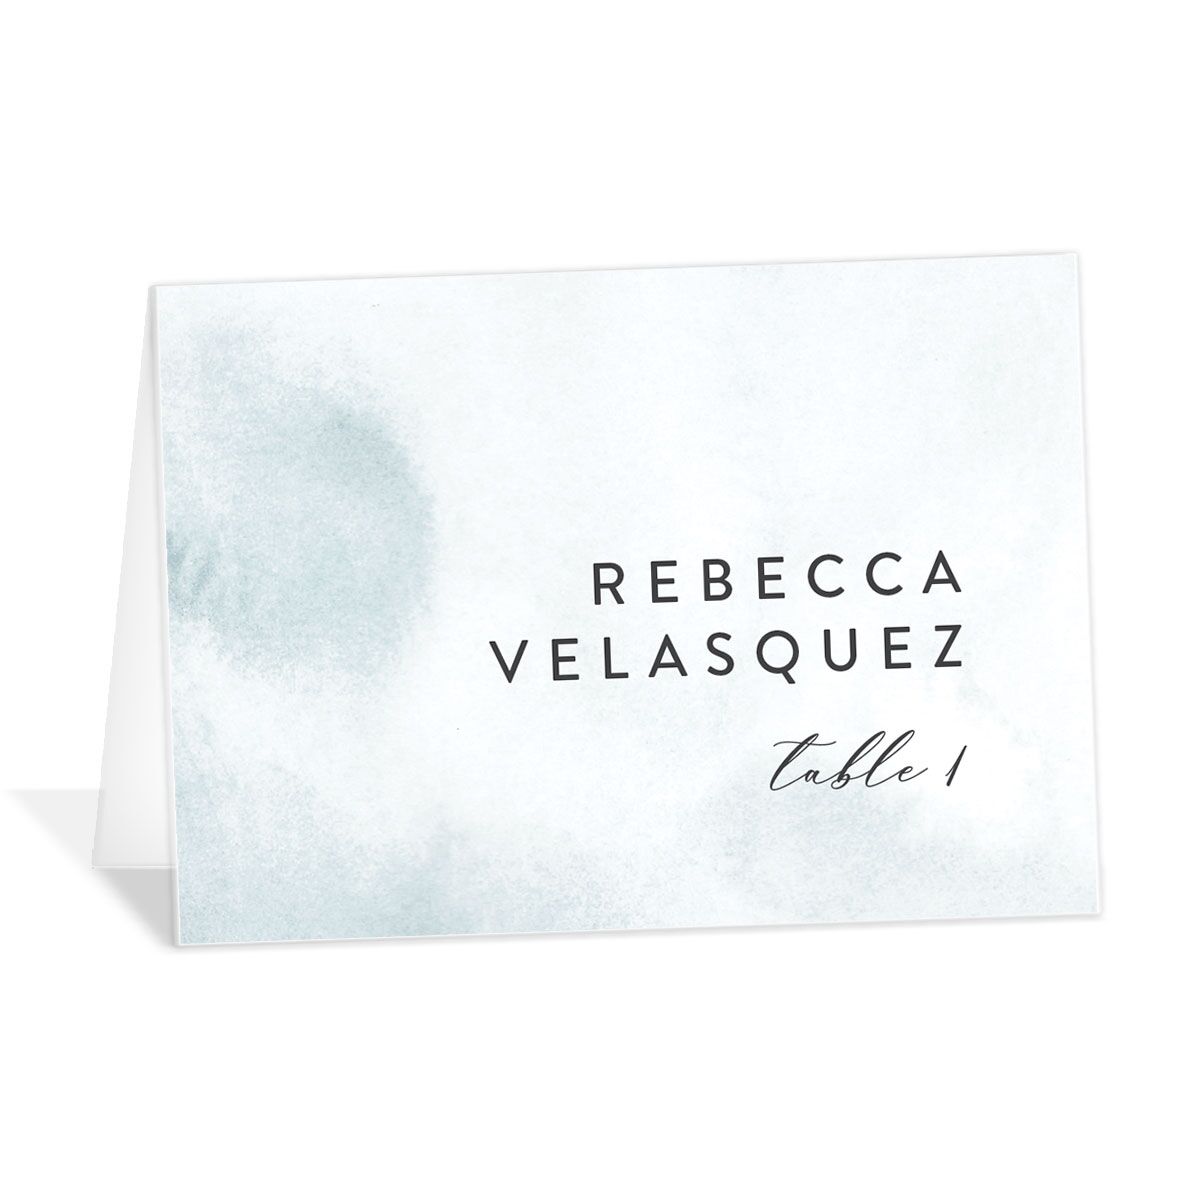 A Wedding Place Card from the Elegant Ethereal Collection